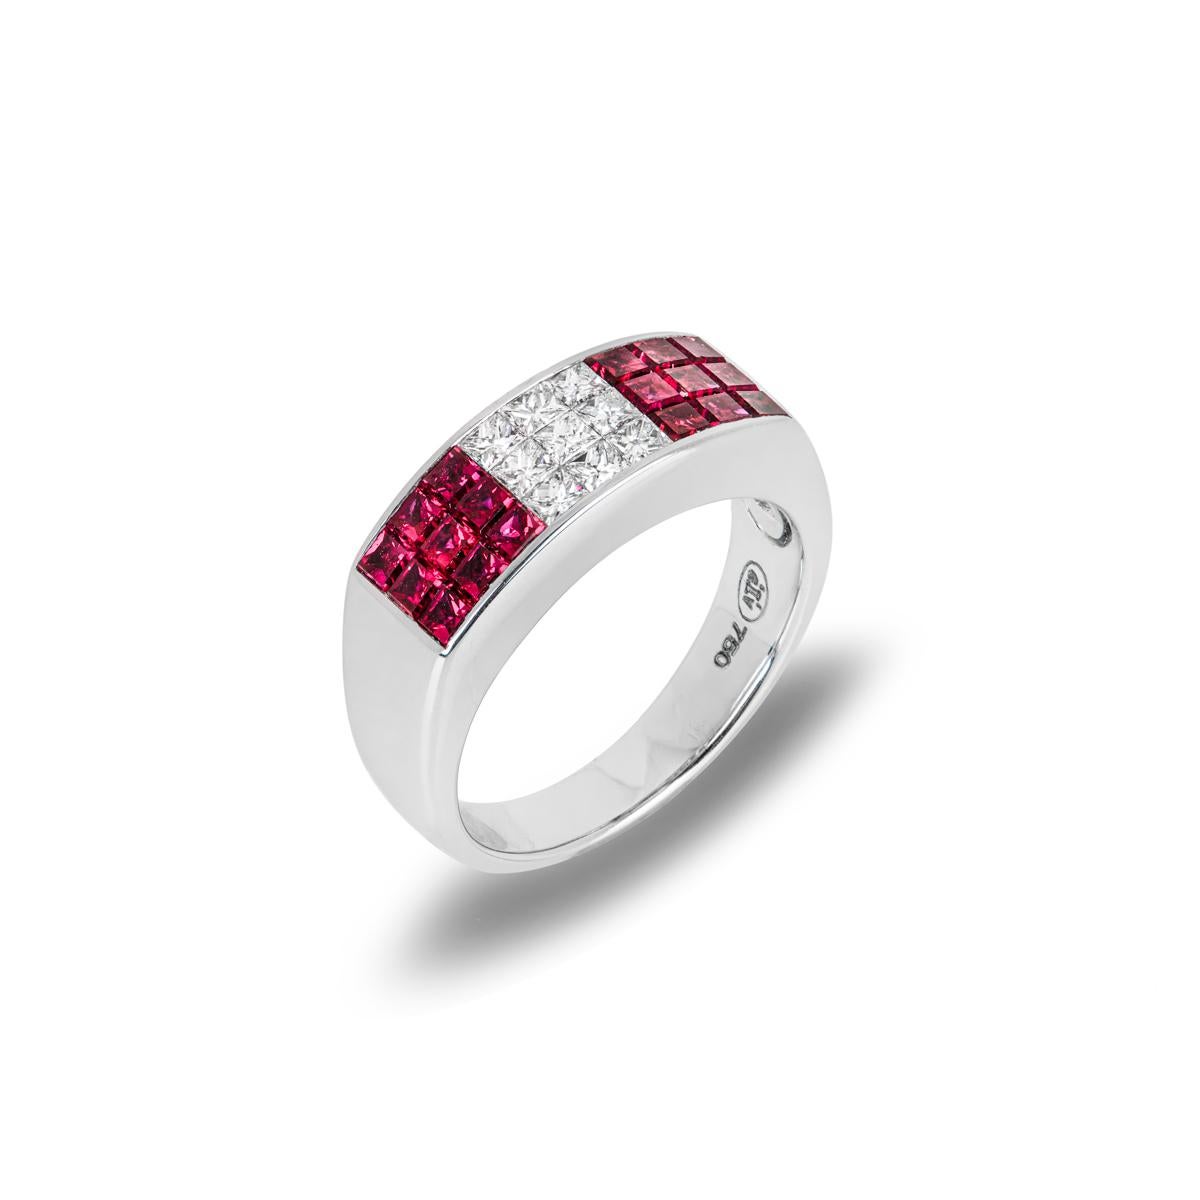 A ruby and diamond dress ring set in 18k white gold. The ring is composed of 18 princess cut rubies totalling 2.00ct and 9 princess cut diamonds totalling 0.50ct. The ring is 7mm in width, has a gross weight of 7.80 grams and is currently a size UK